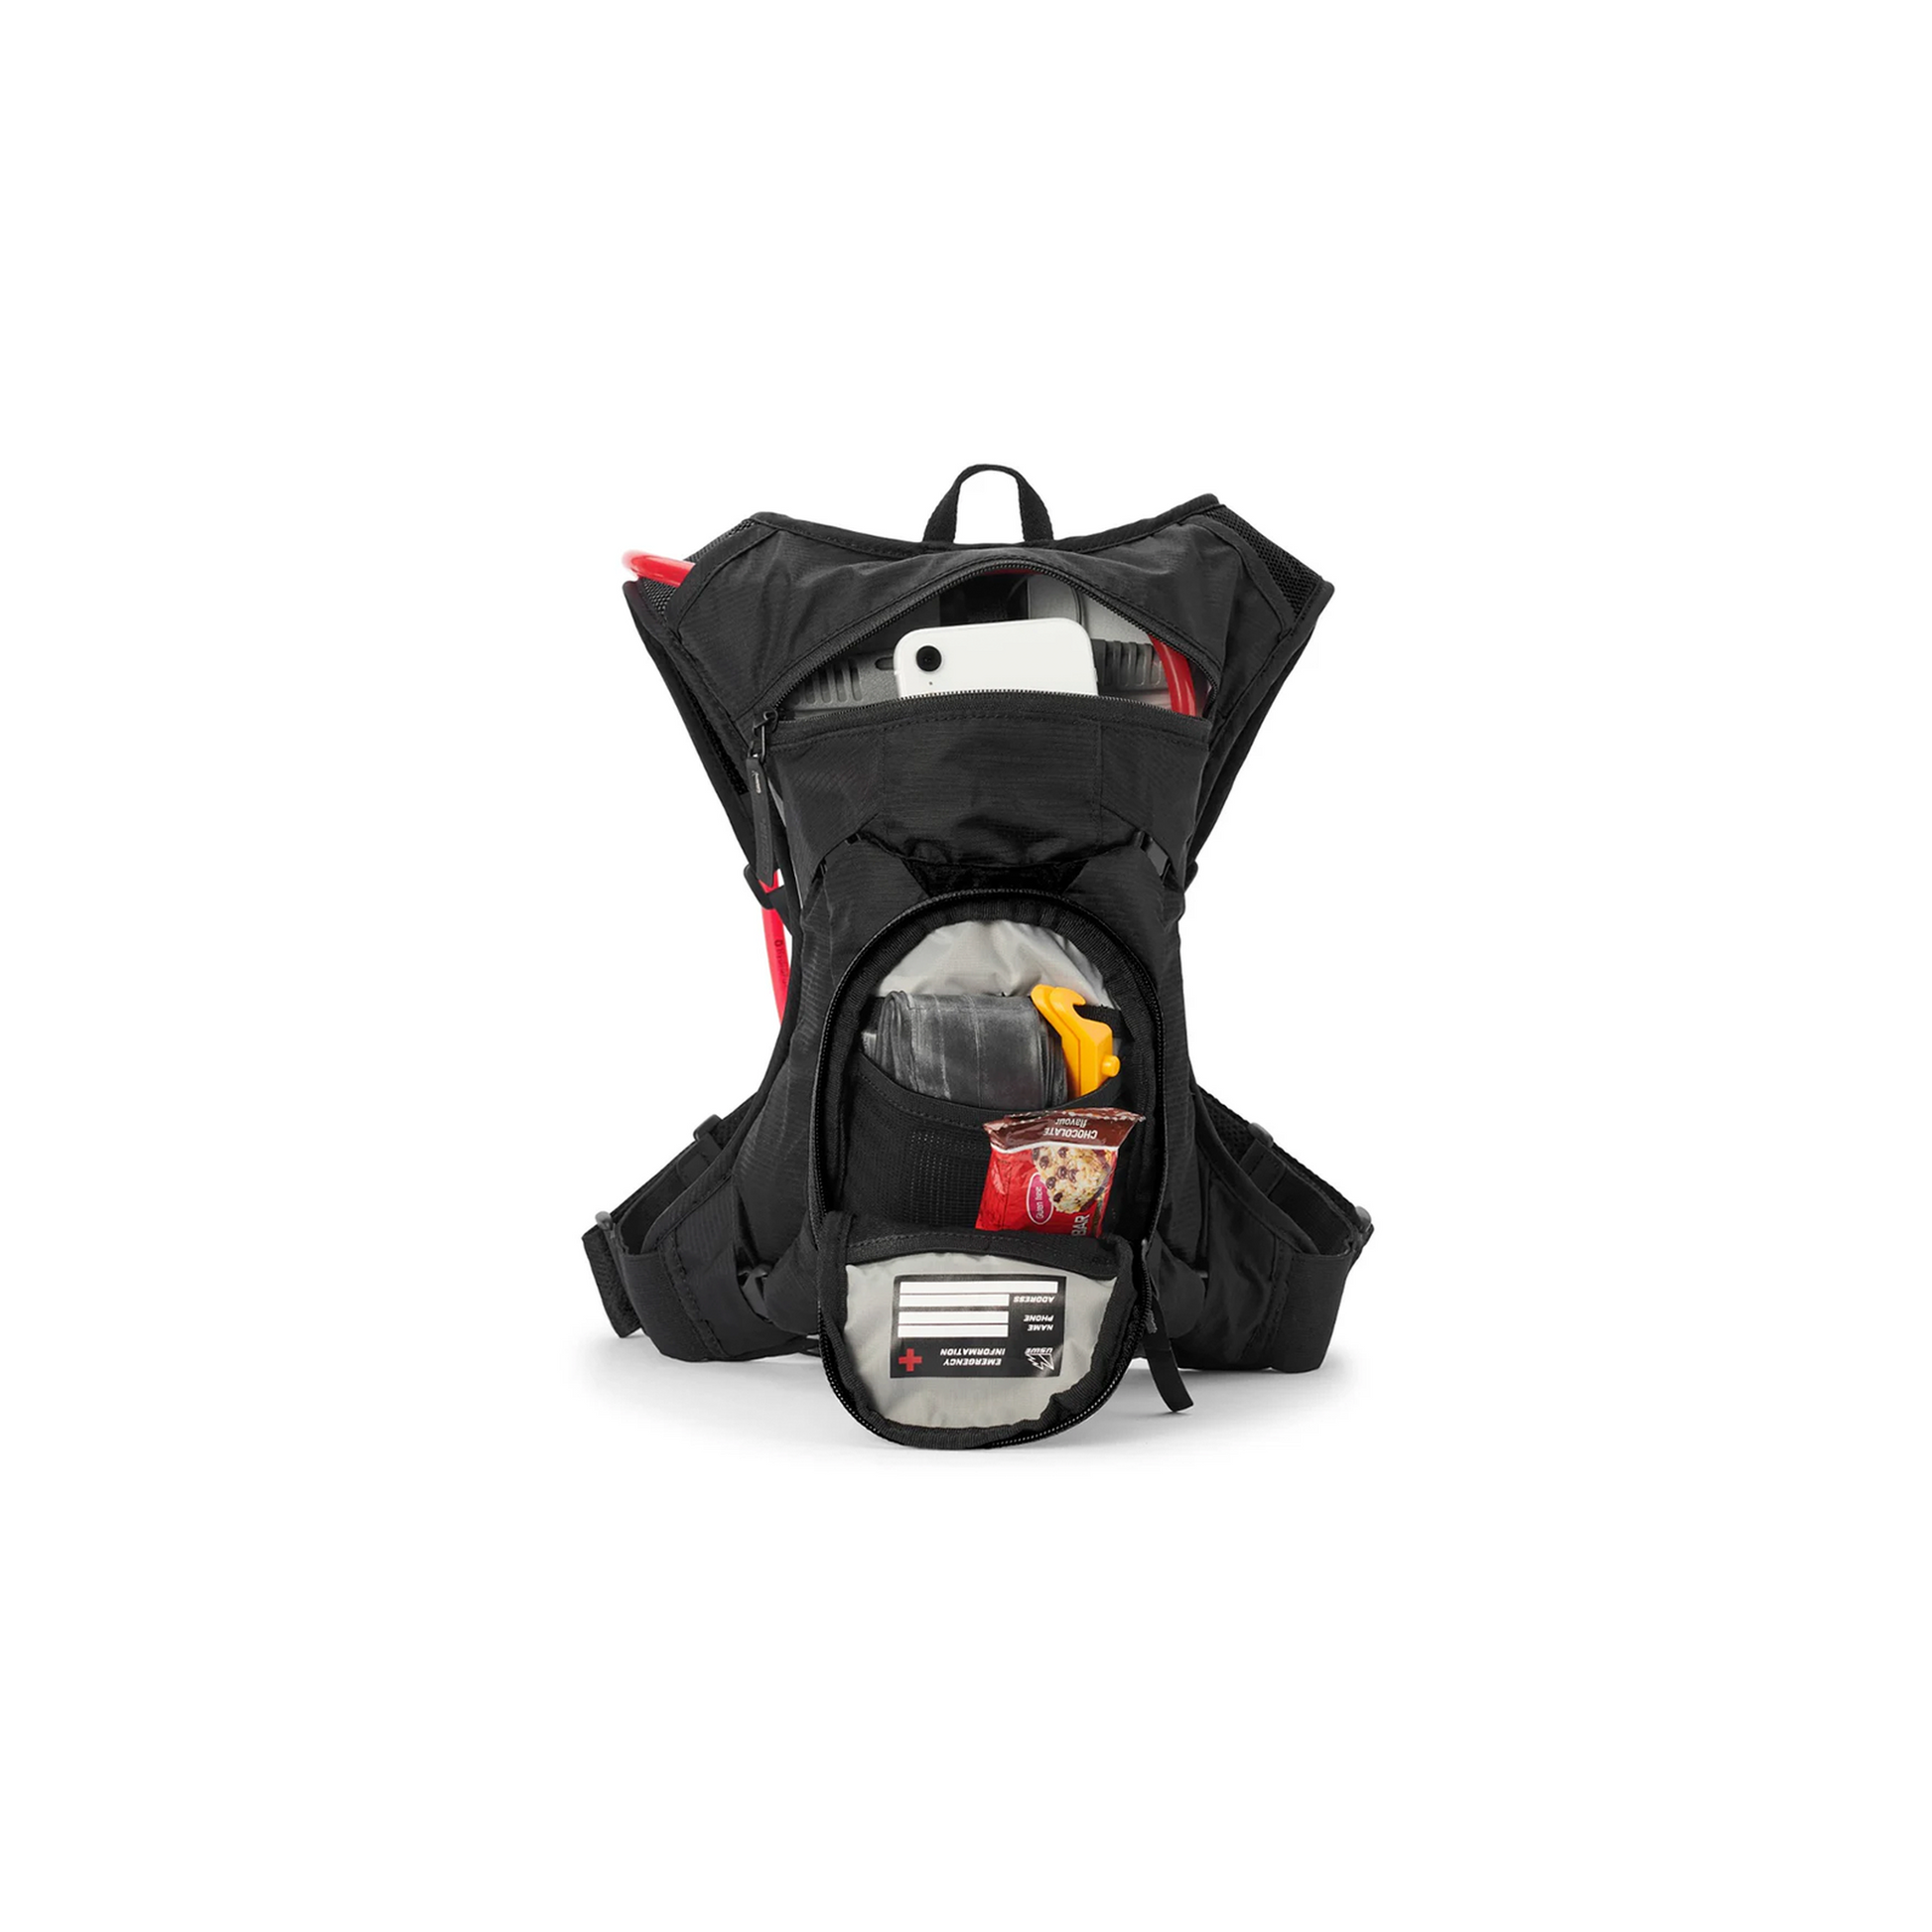 USWE MTB Hydro 3L Hydration Pack | Complete Cyclist - This is the hydration backpack designed for the performance minded MTB or gravel cyclist, who’s searching for a premium bike backpack that will stay put on your back even in the most gnarly terrain.